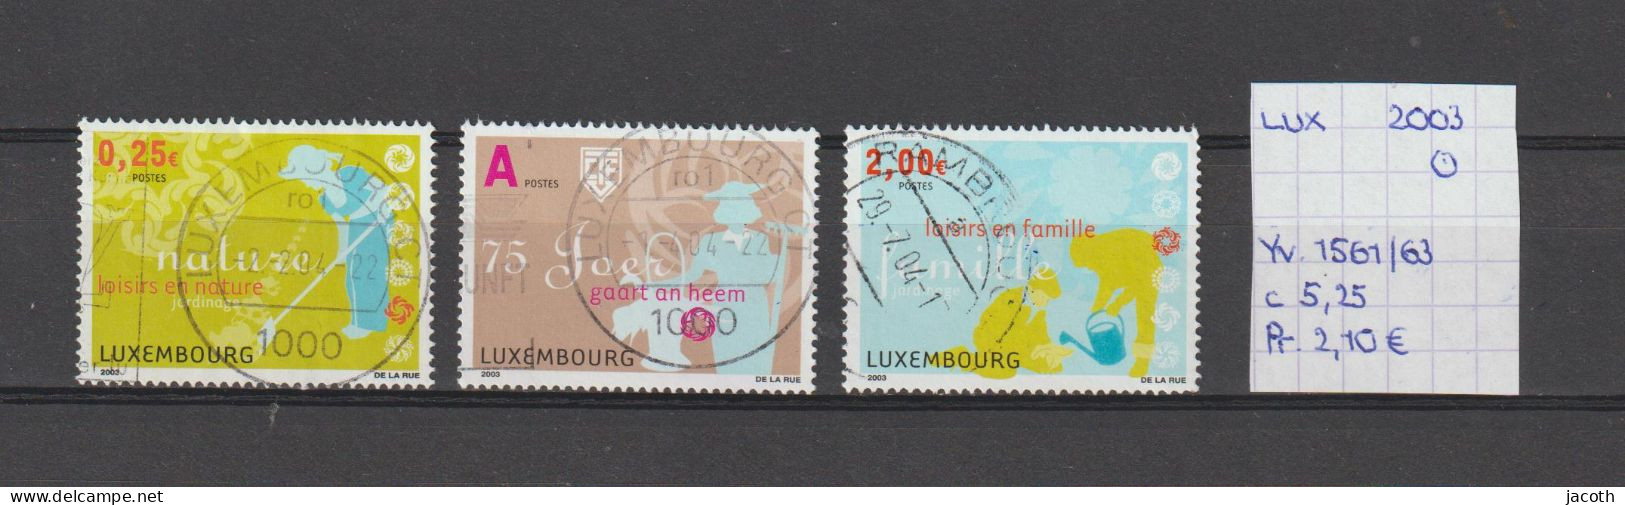 (TJ) Luxembourg 2003 - YT 1561/63 (gest./obl./used) - Usados